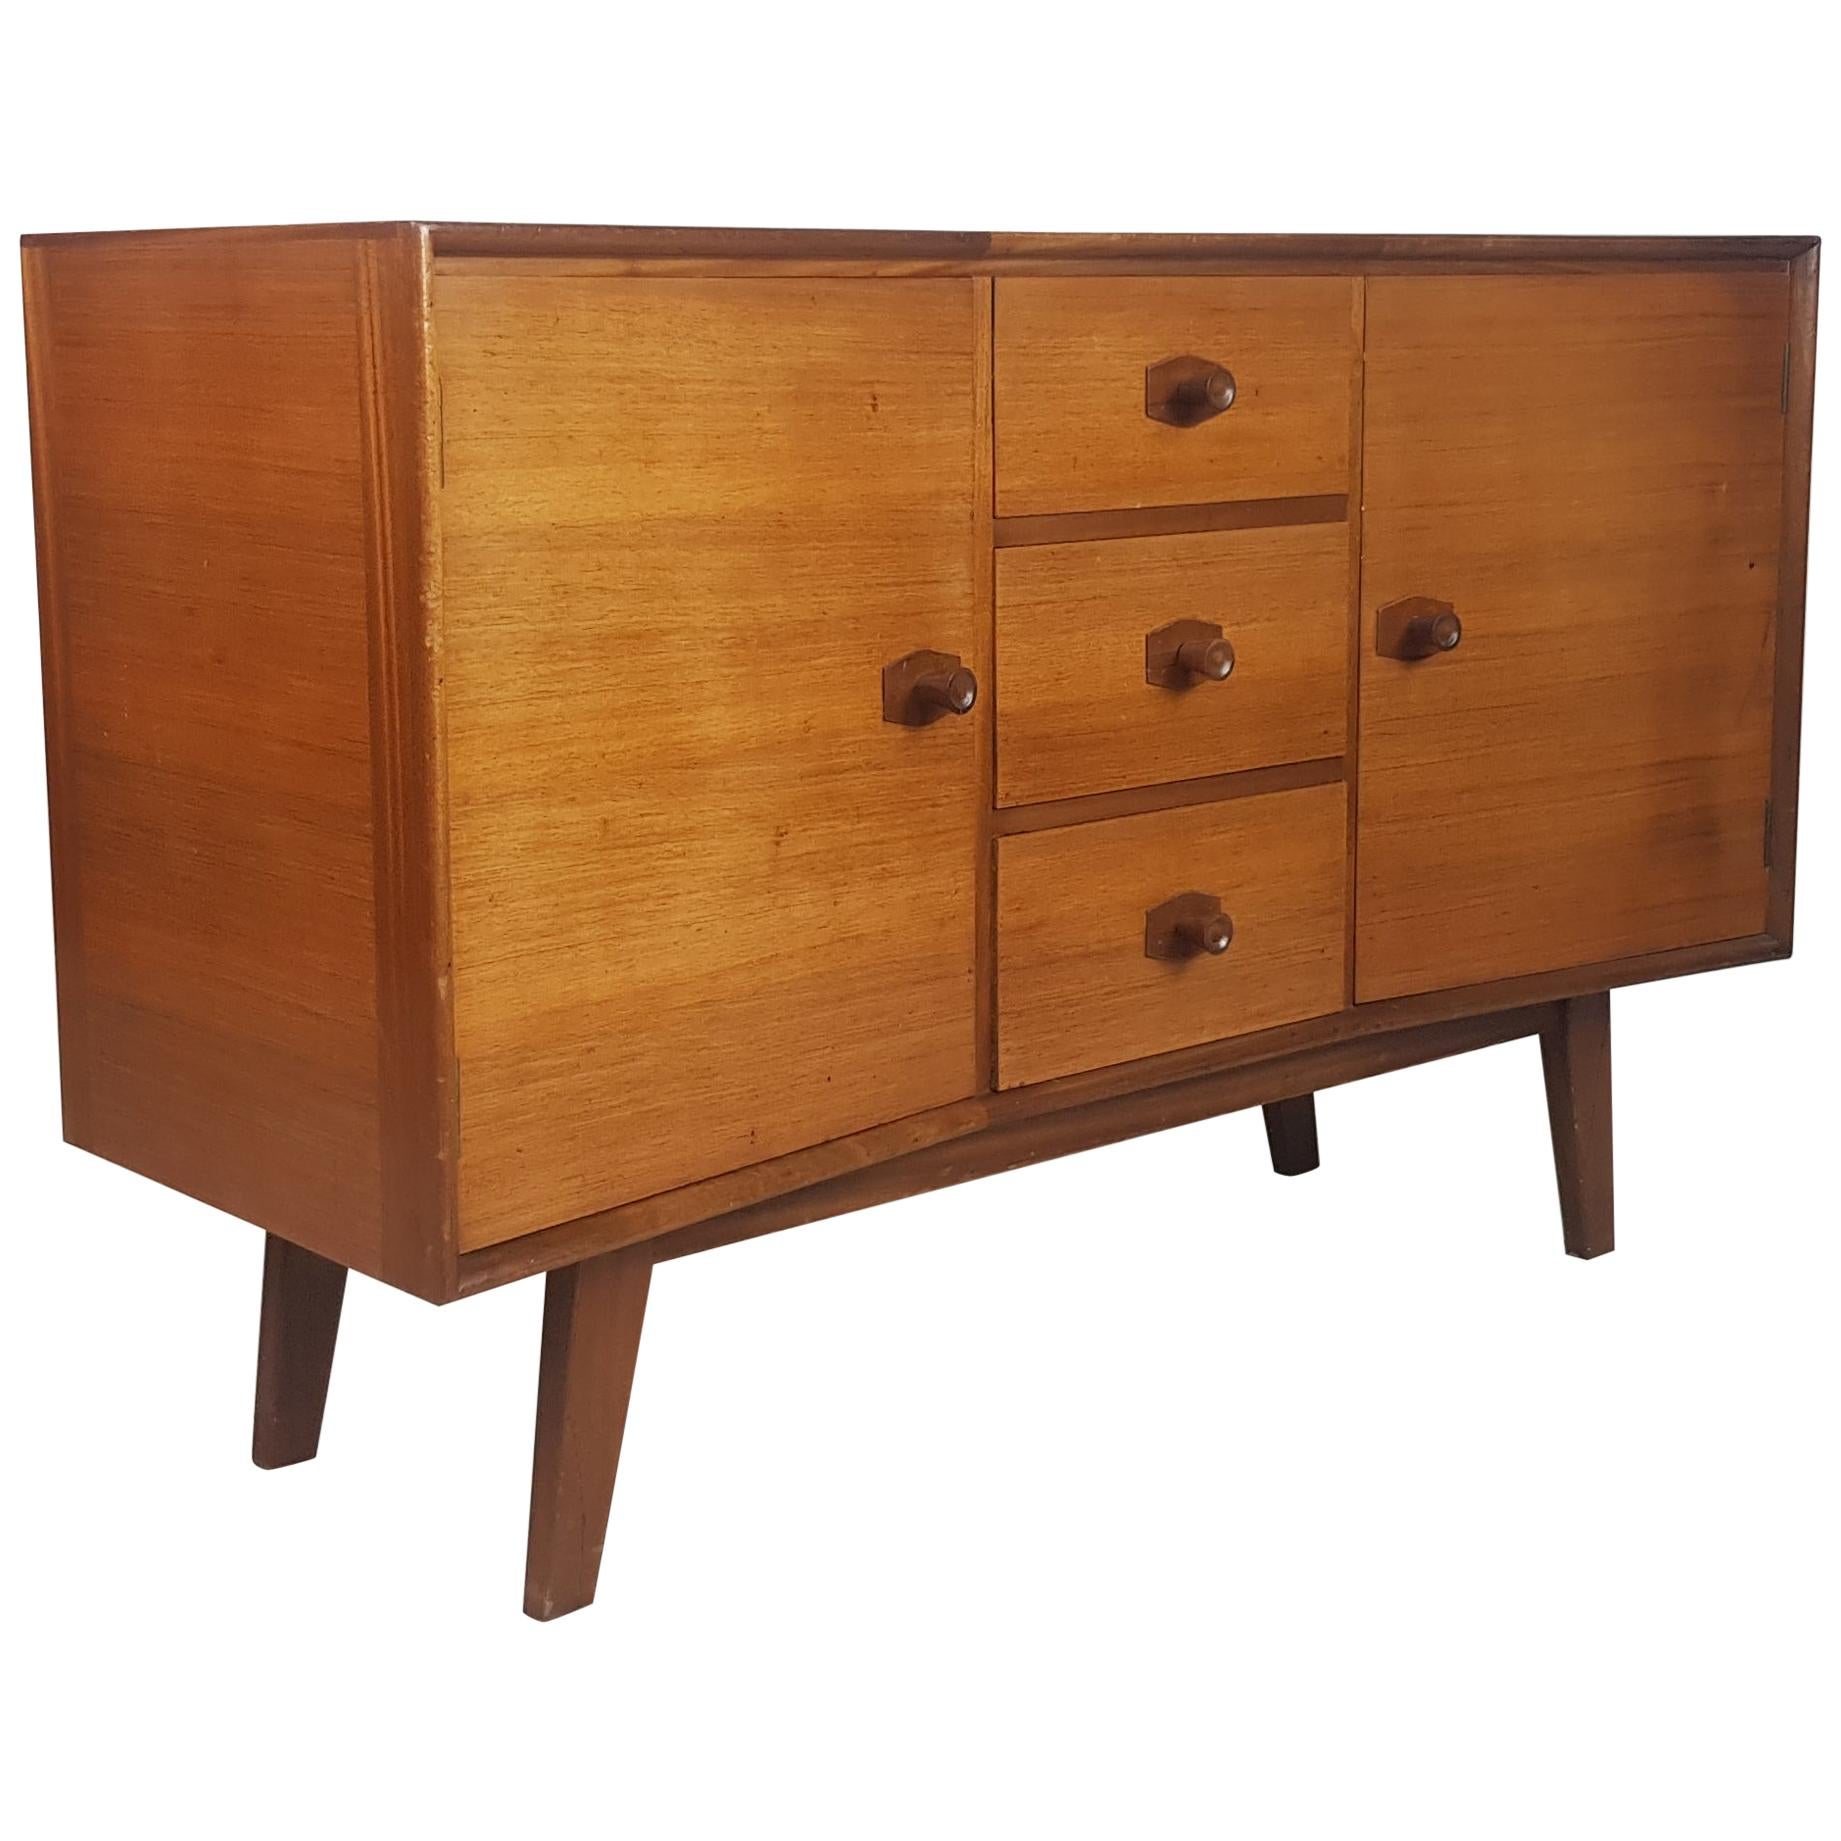 Midcentury Small Teak Sideboard by Heals, 1950s For Sale